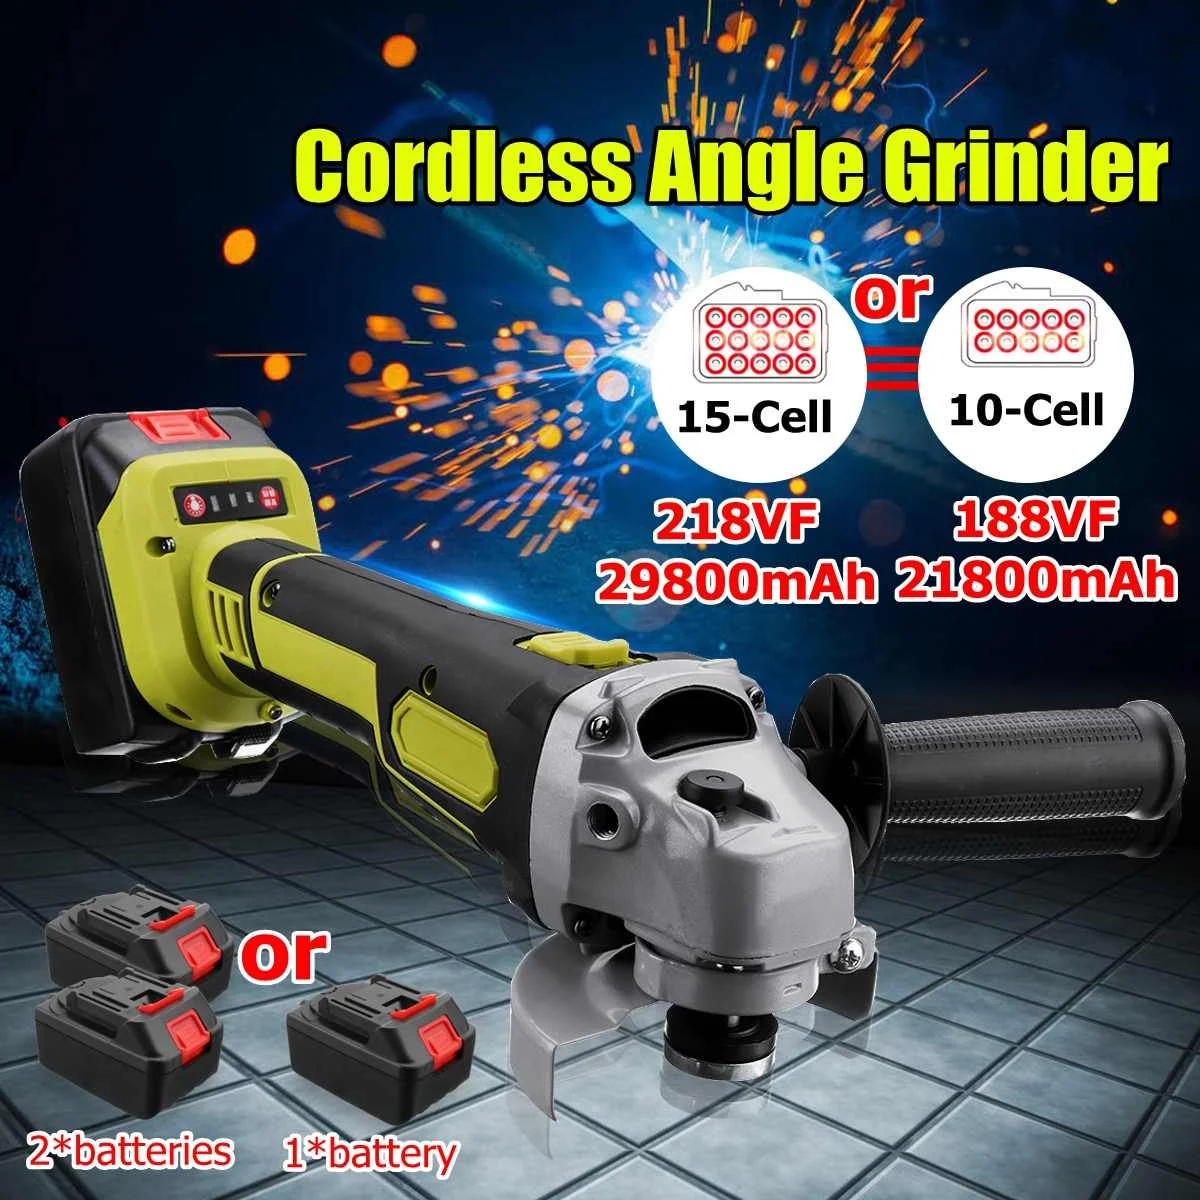 188VF/218VF Electric Angle Grinder Cordless 10/15-cell large capacity battery Polisher Polishing Machine Cutting Tool Set